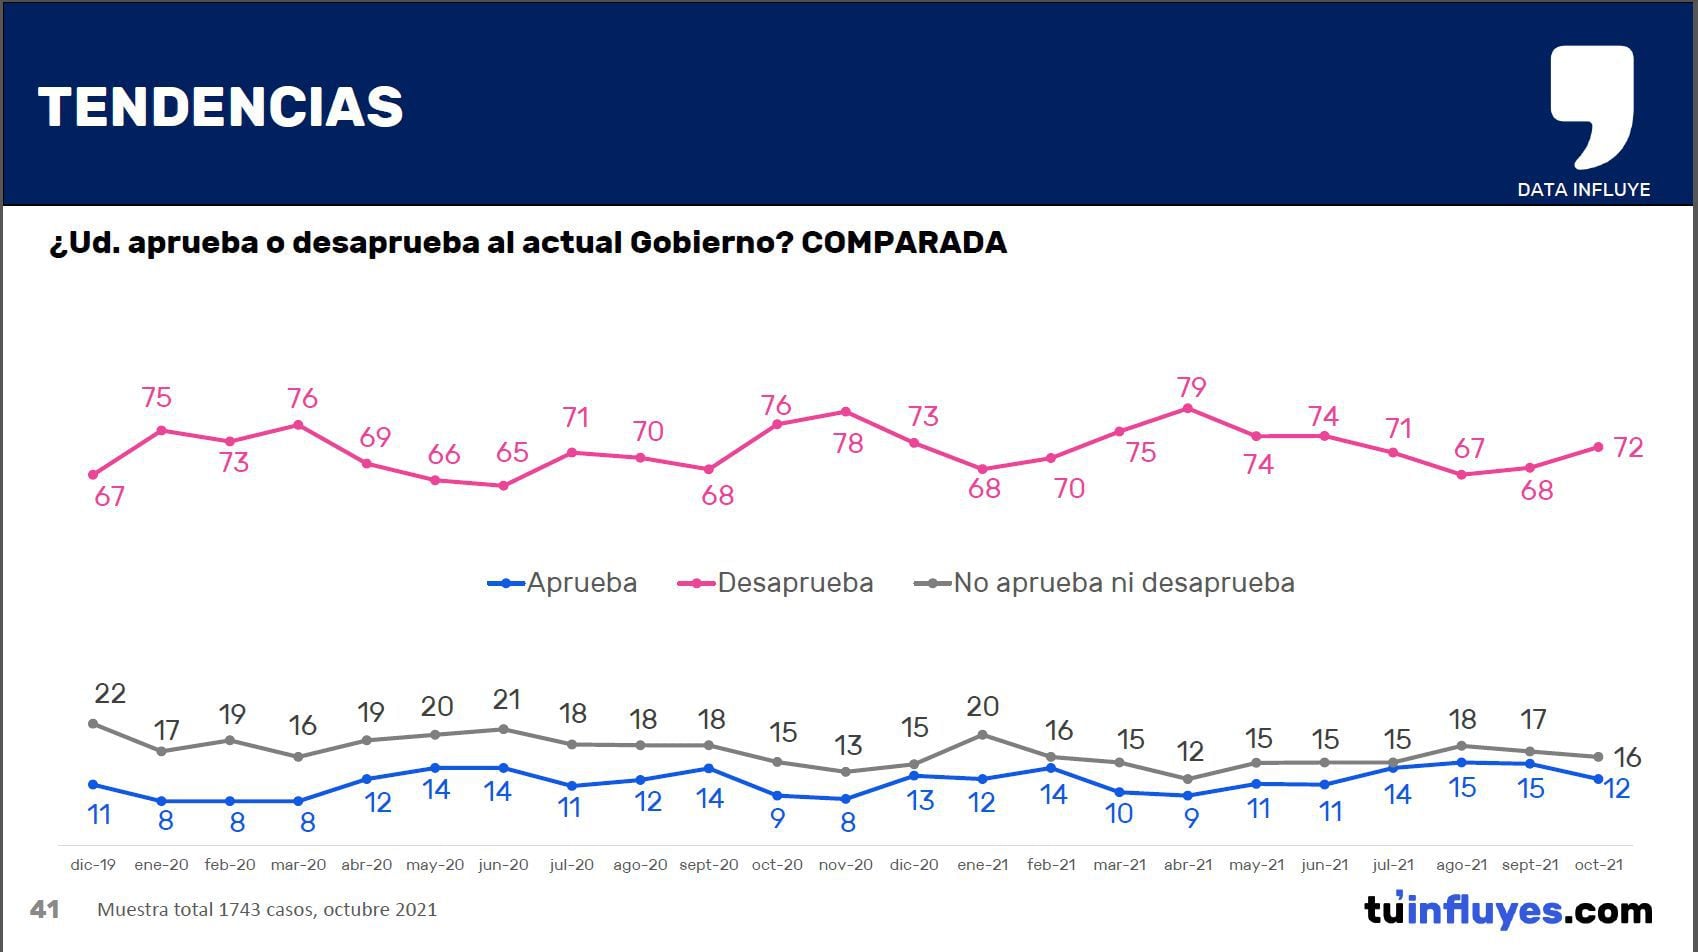 Chile presidential approval survey.  Tuinfluyes.com.  November 2021. According to this poll, support for Piñera plummeted to 12%.